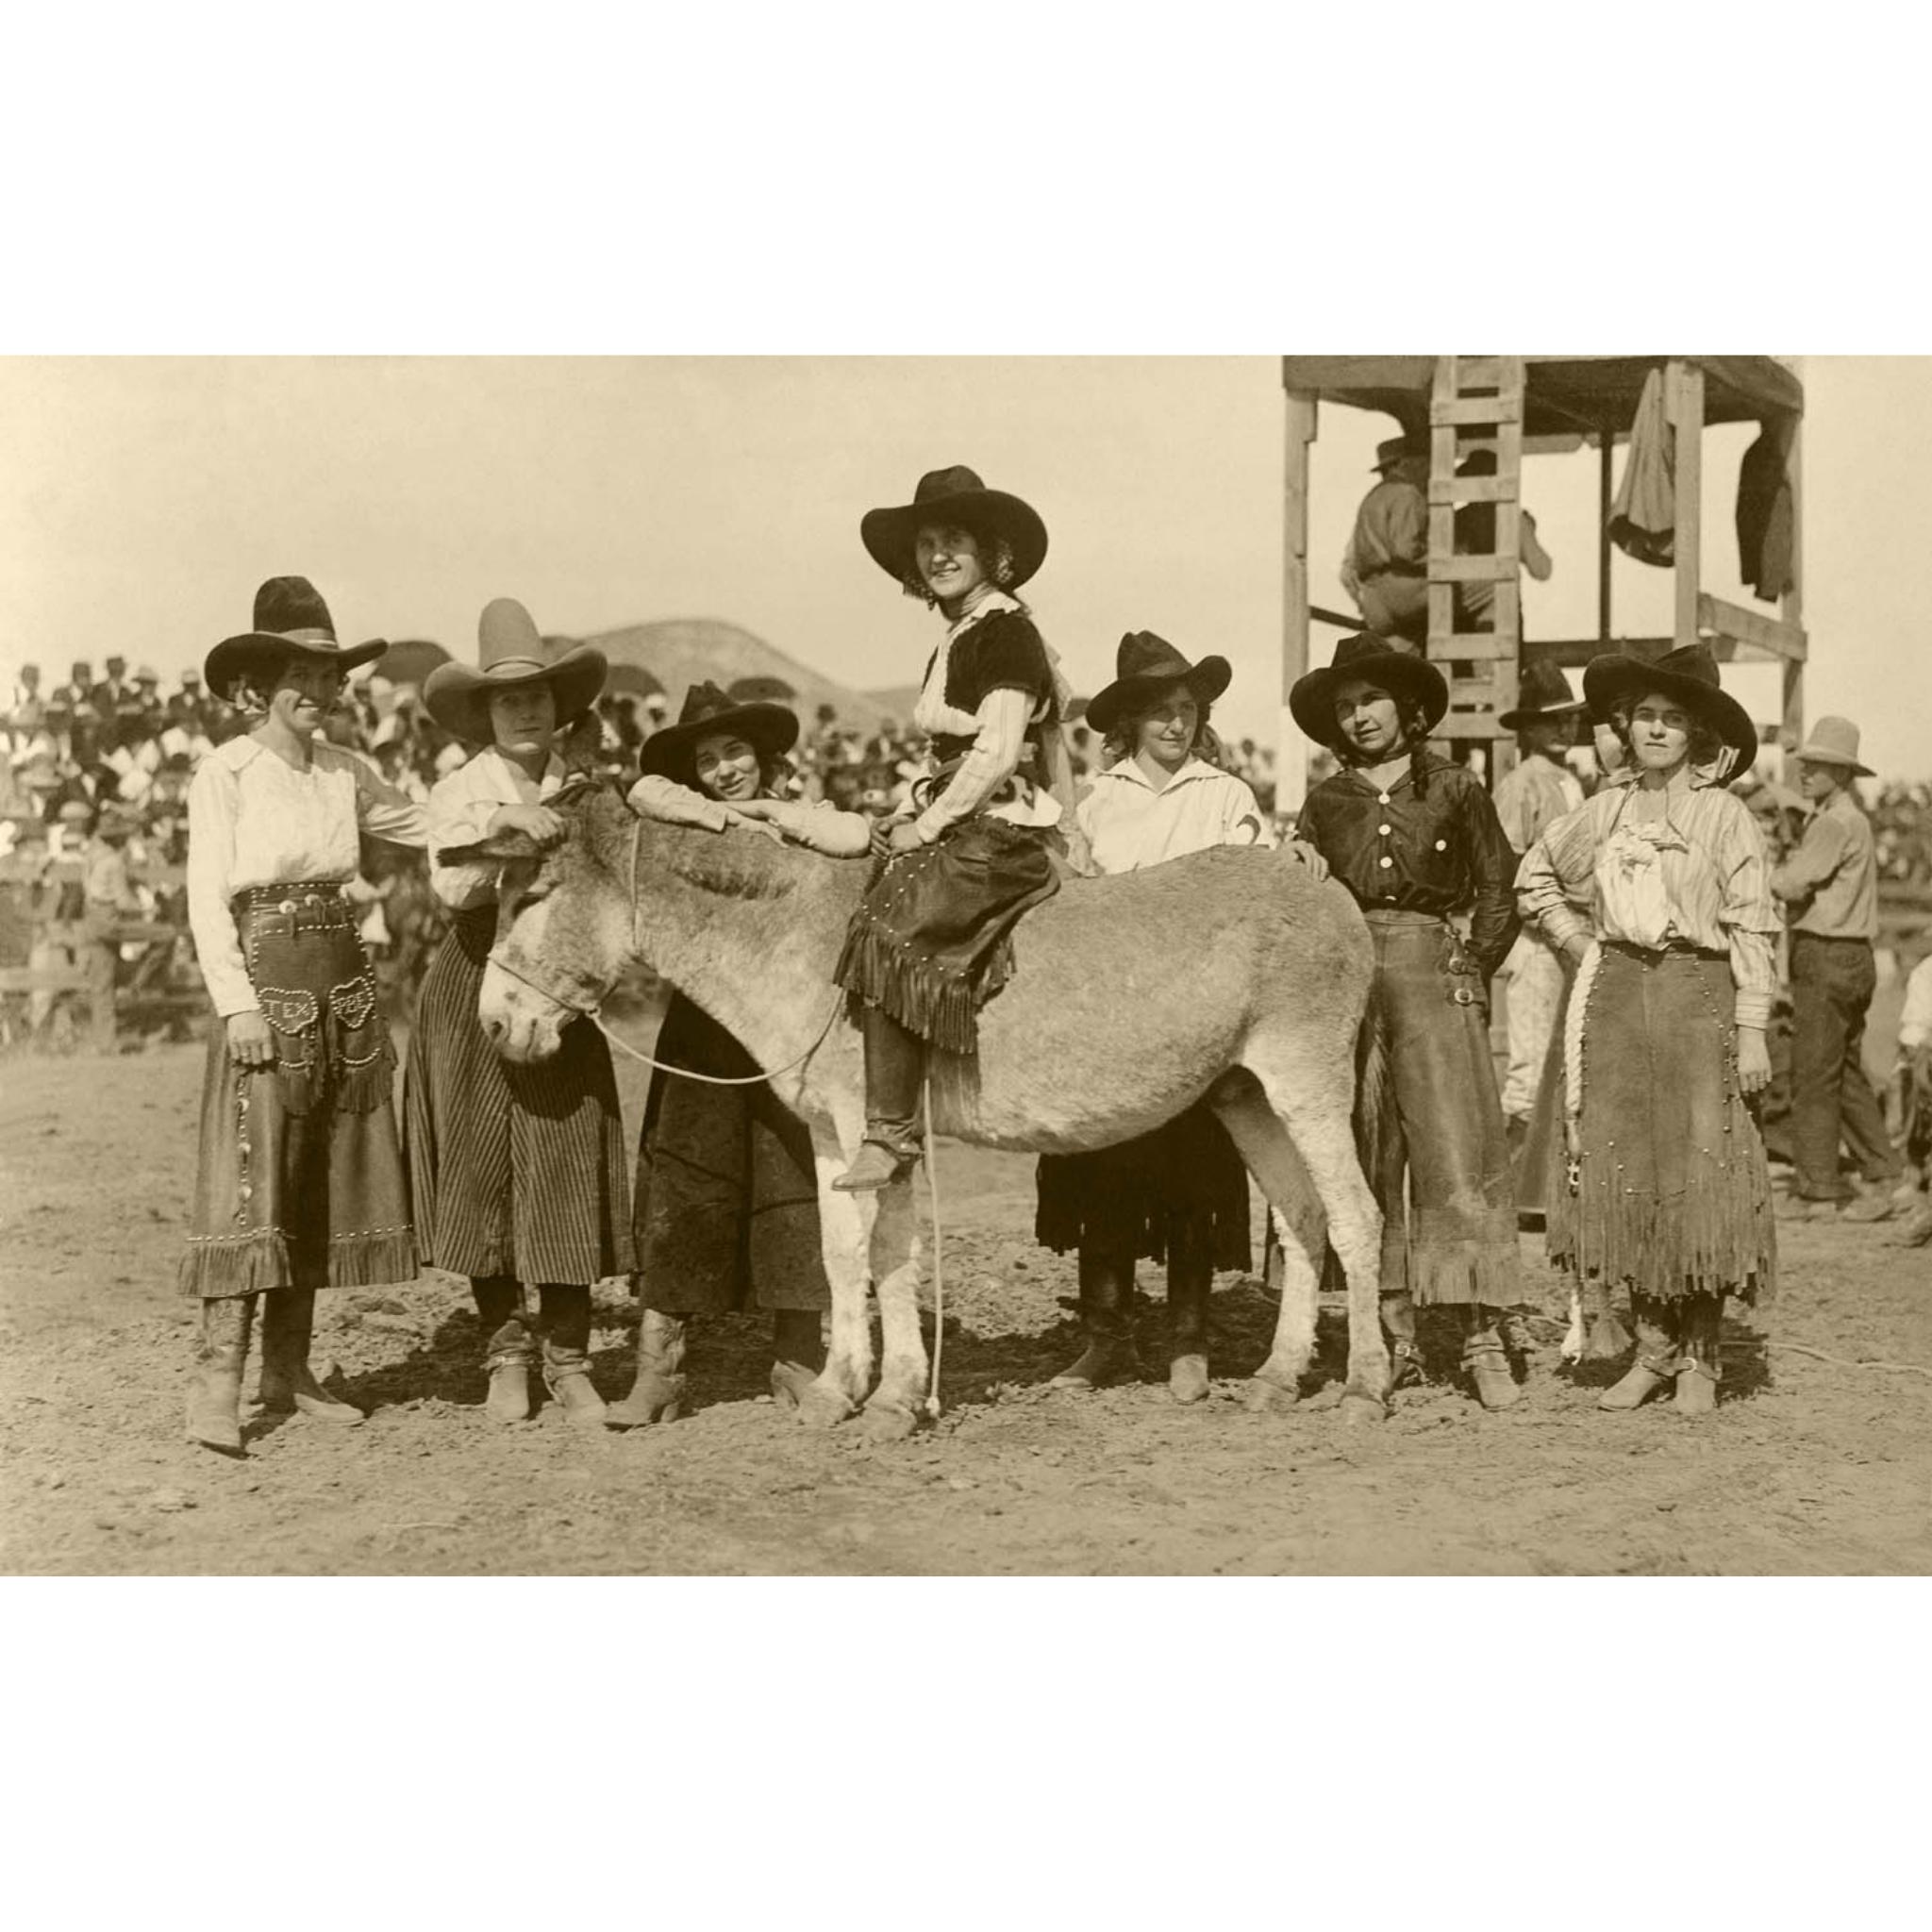 Rodeo Cowgirls 3 - Donkey - Doubleday - ca. 1925 Photograph